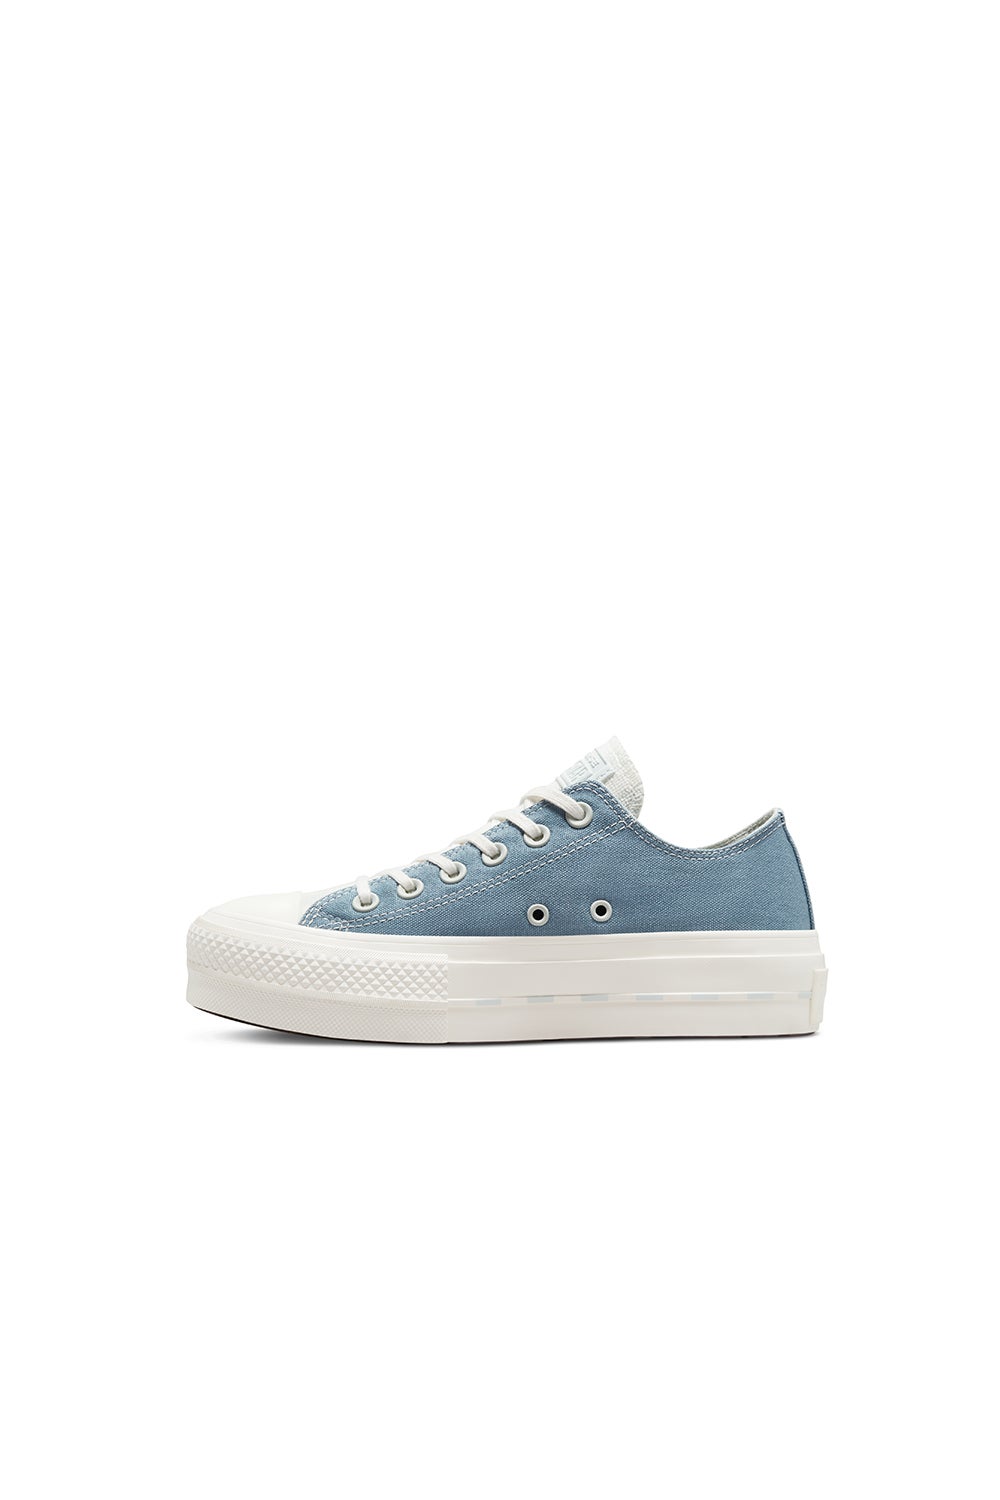 Converse Chuck Taylor All Star Lift Crafted Canvas Low Top Indigo Oxide